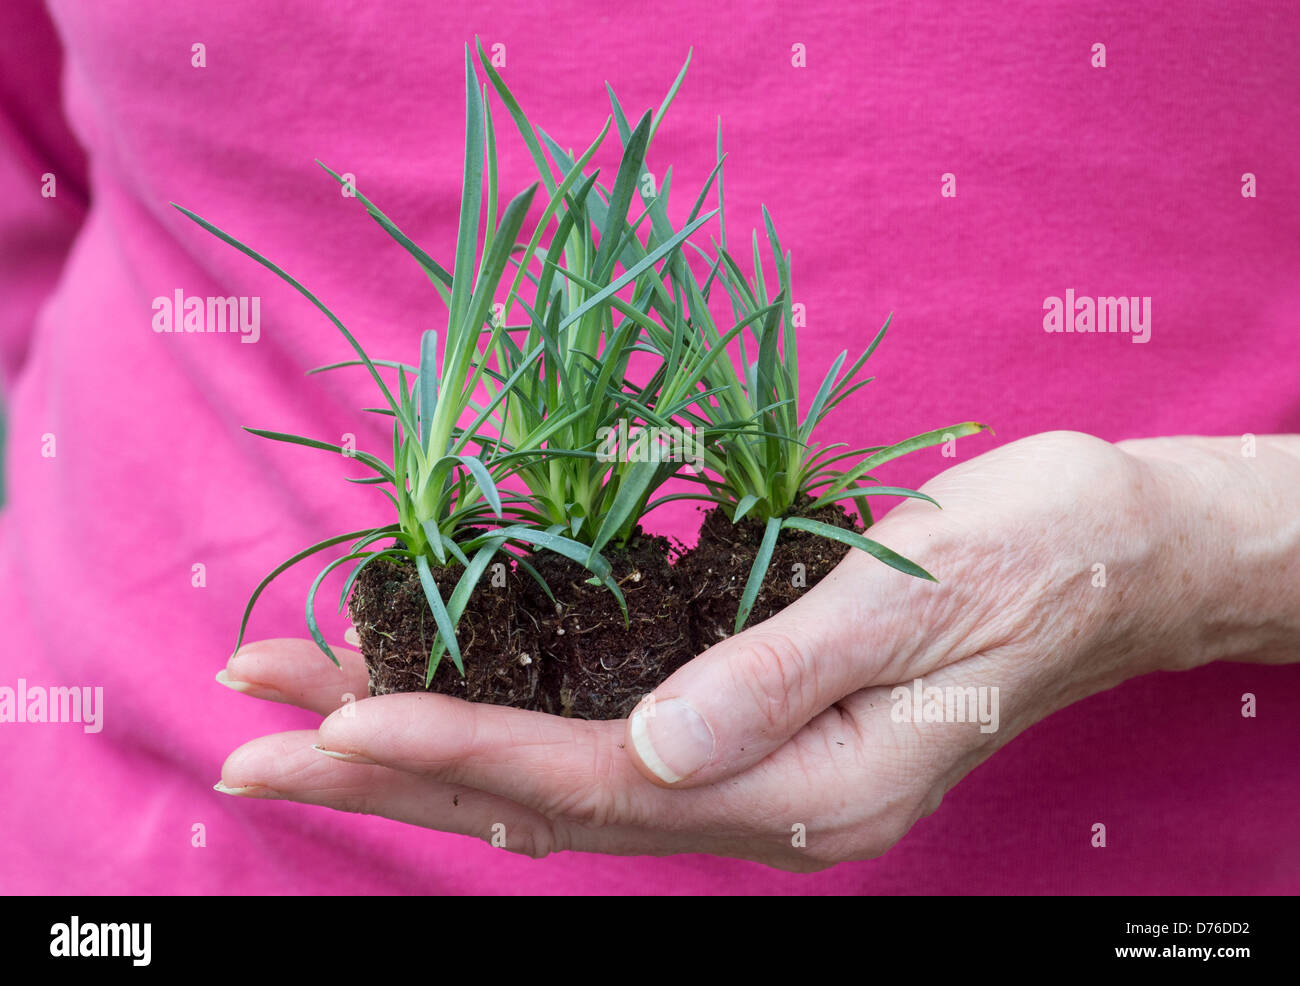 Gardeners hand holding large plugs of Dianthus Summertime flowers Stock Photo